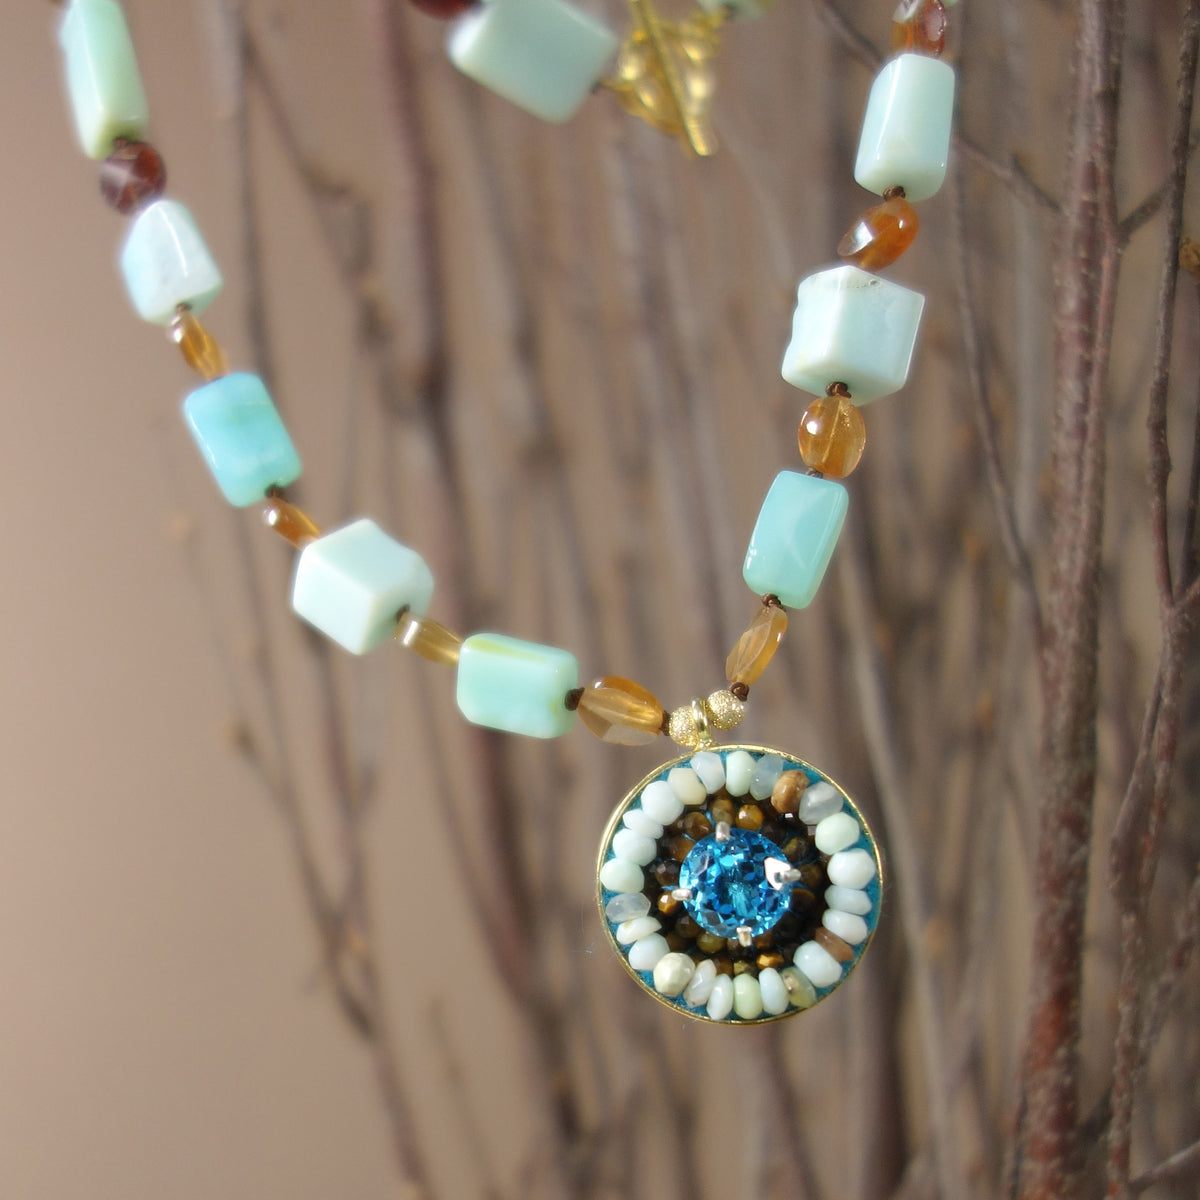 Swiss blue topaz, tiger eye, and opal mosaic necklace